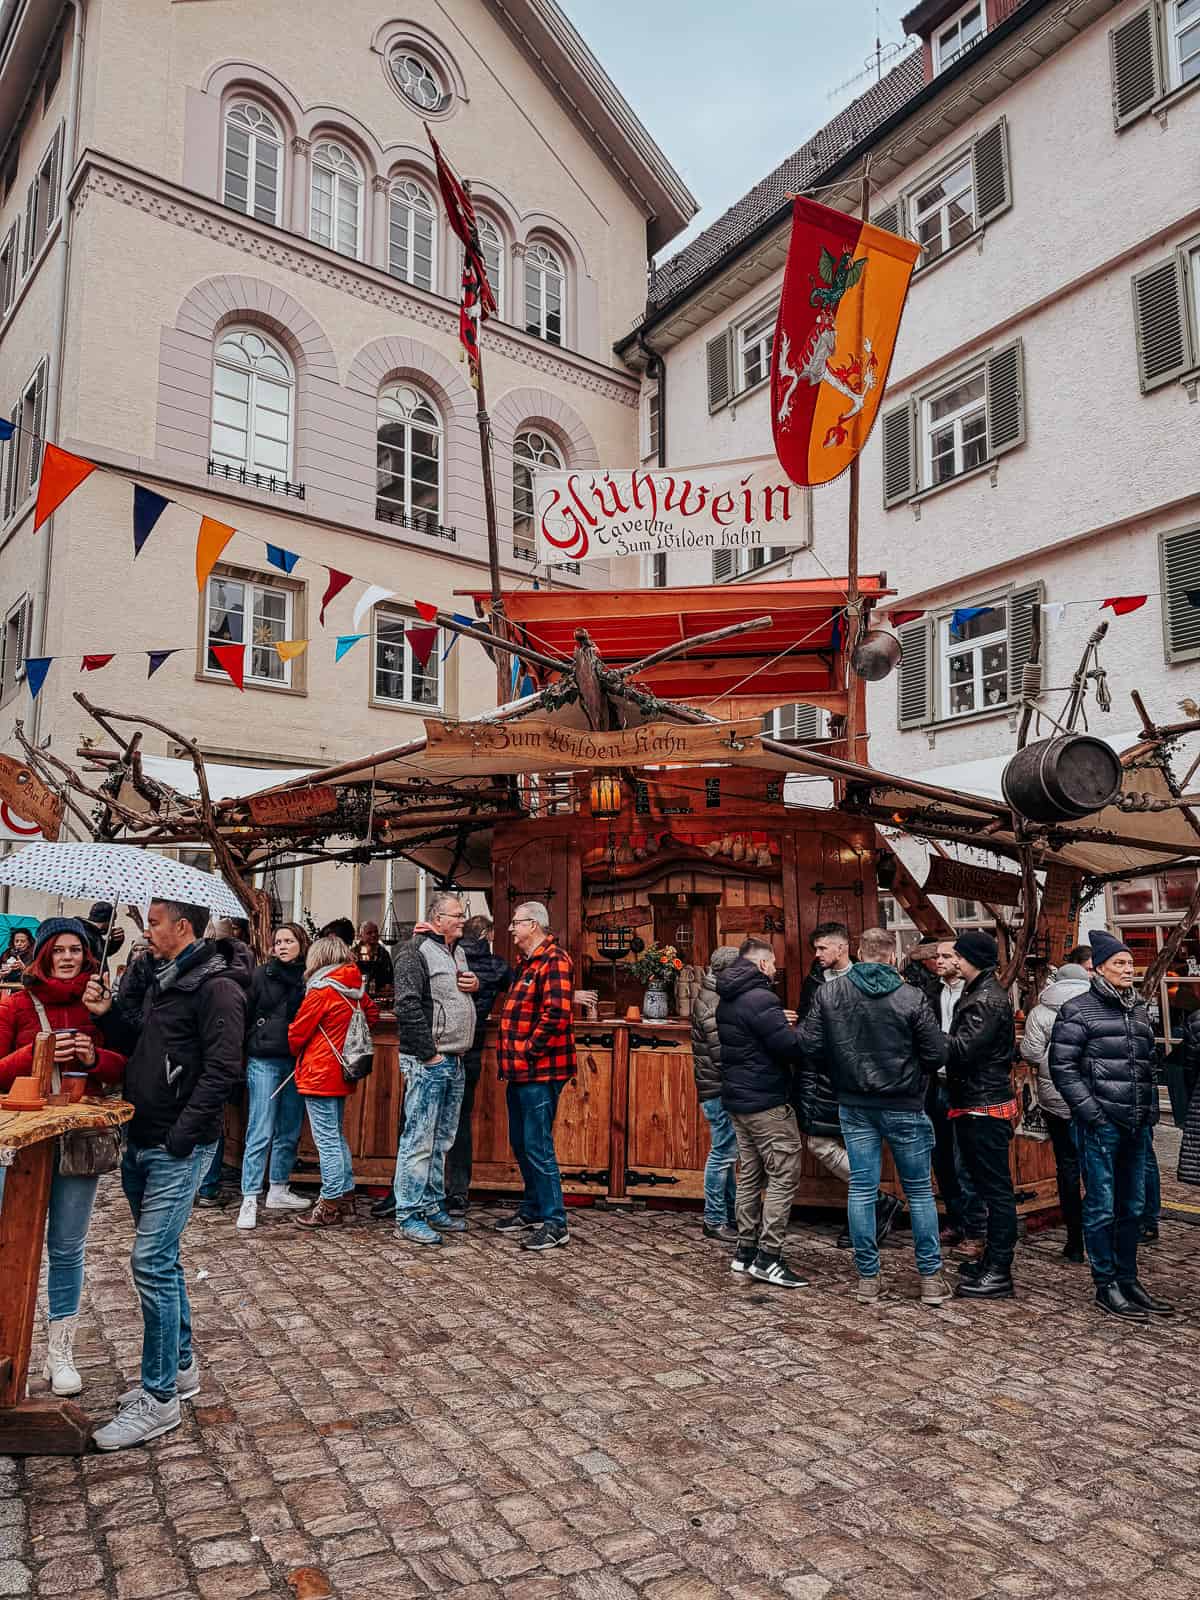 The first image captures a vibrant Glühwein (mulled wine) stand bustling with people. The colorful flags and medieval decorations create a festive atmosphere against the backdrop of traditional German architecture.